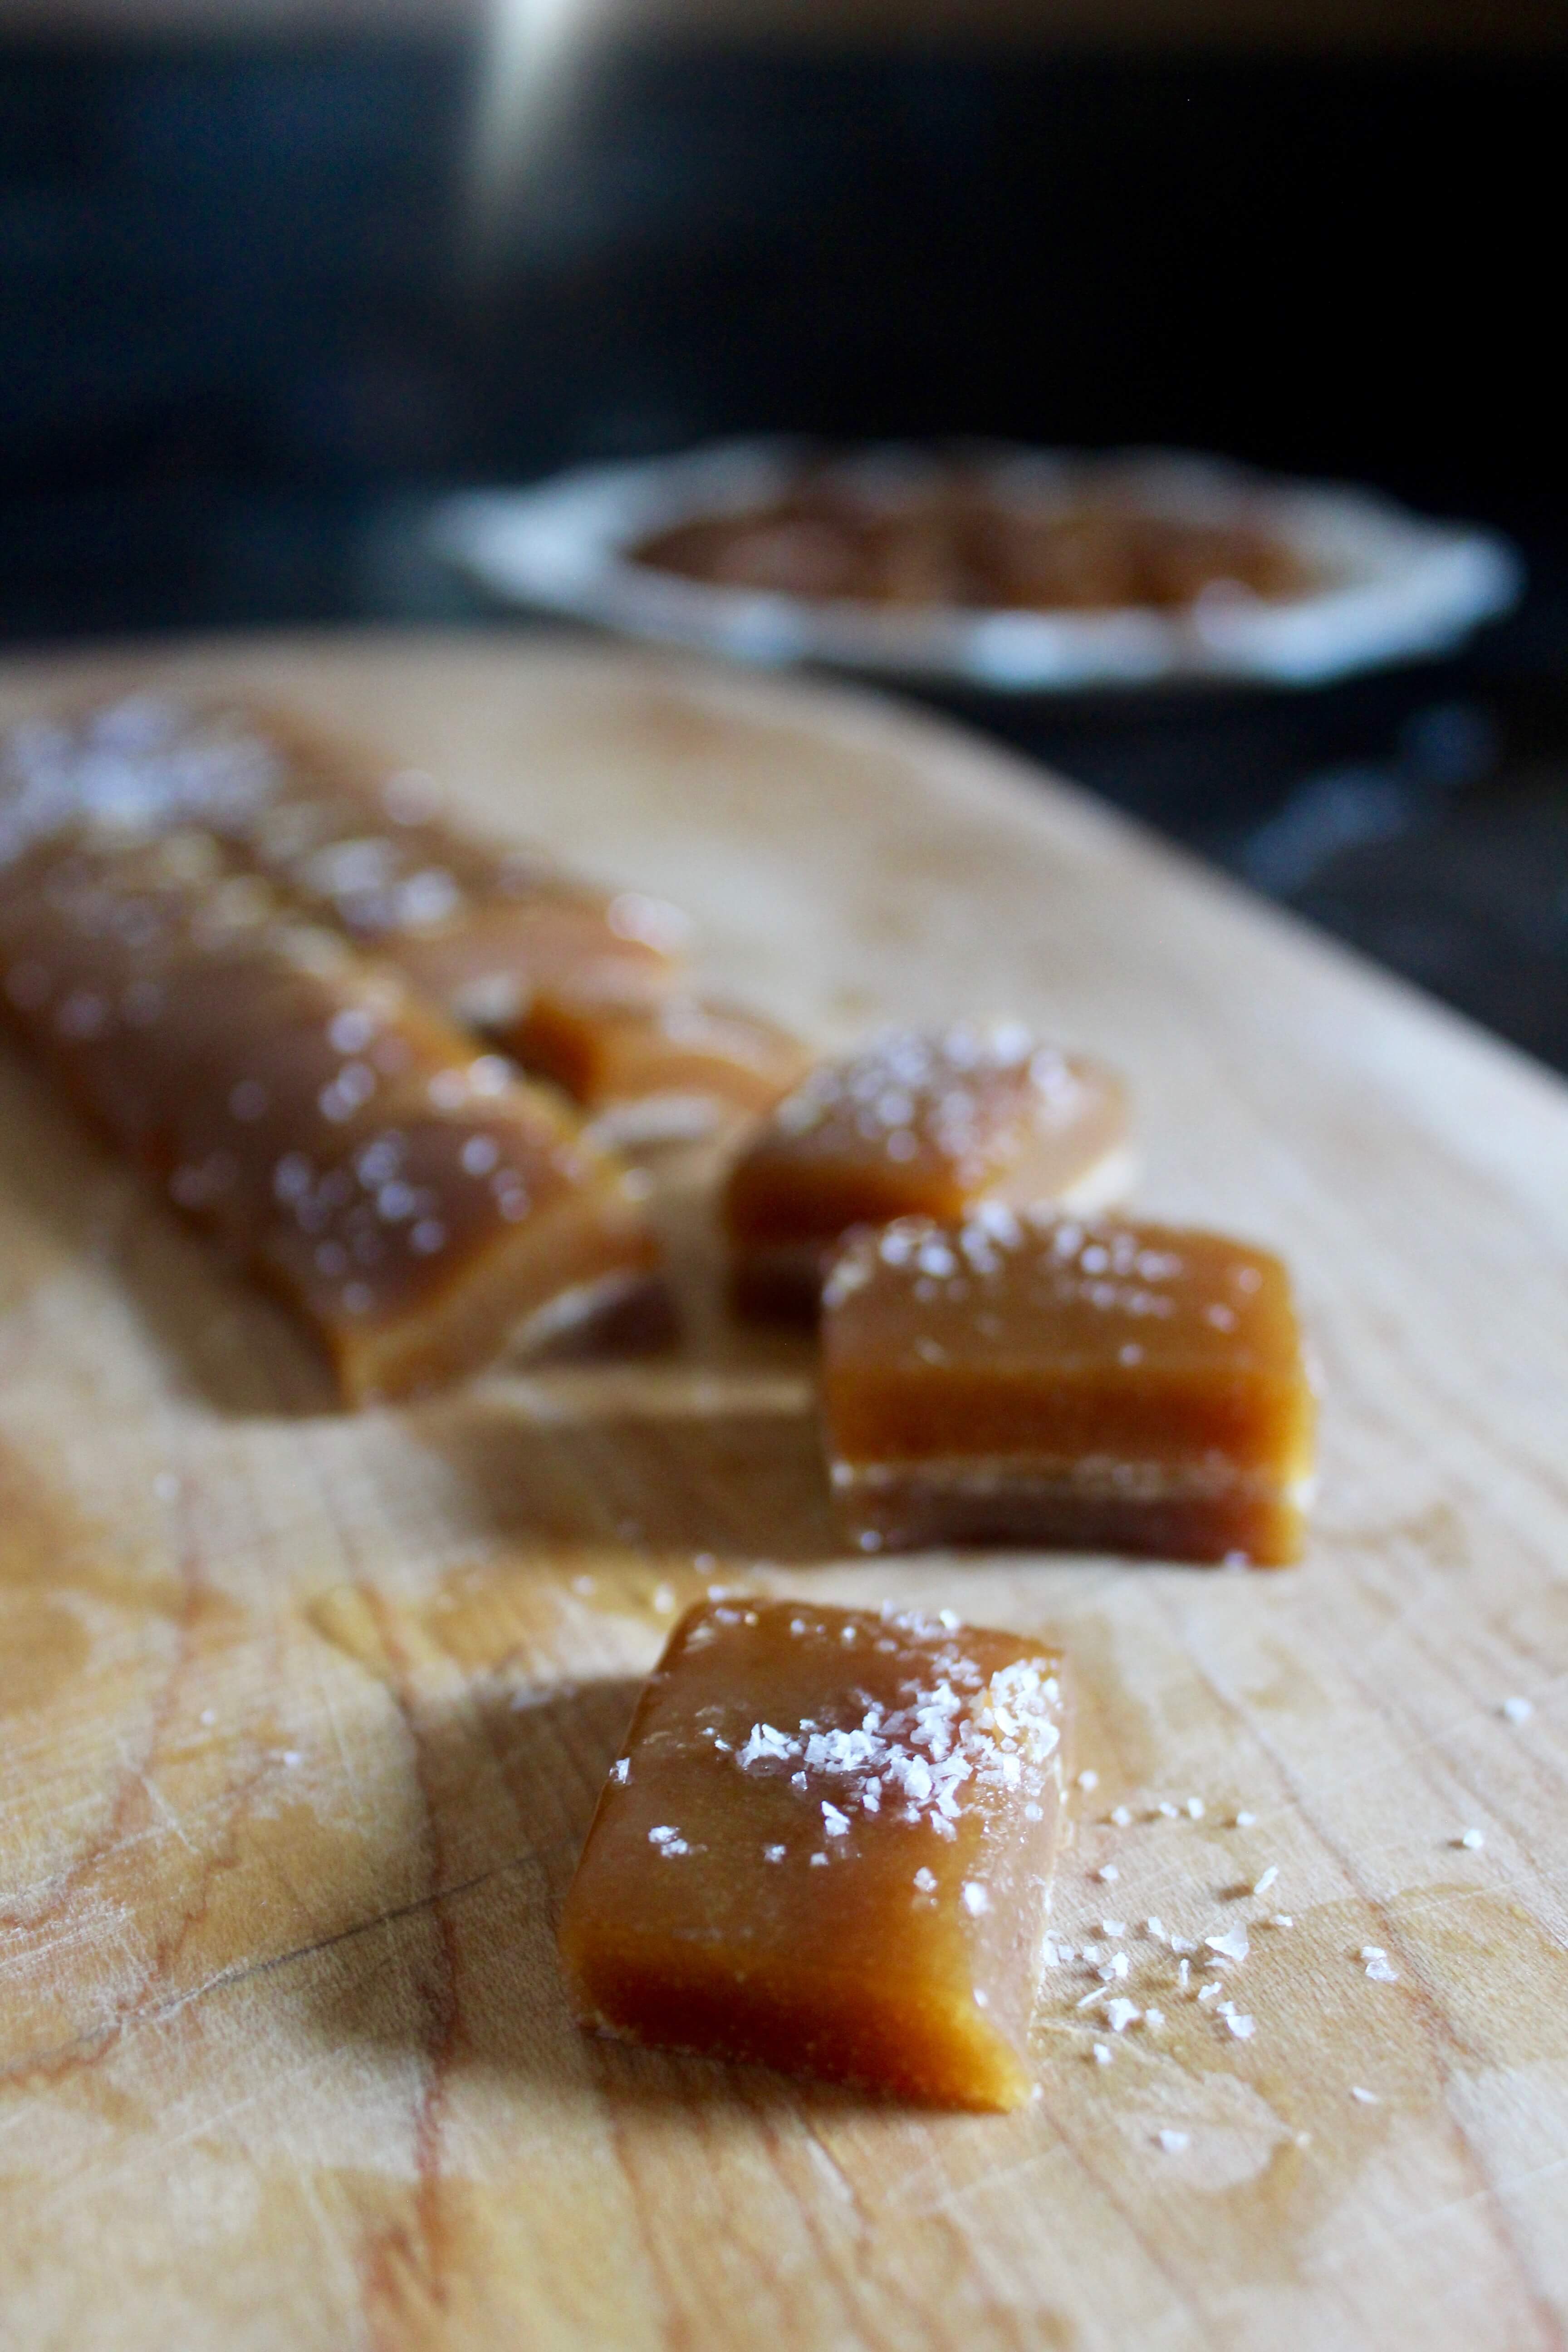 Coconut Milk Caramels Without Corn Syrup